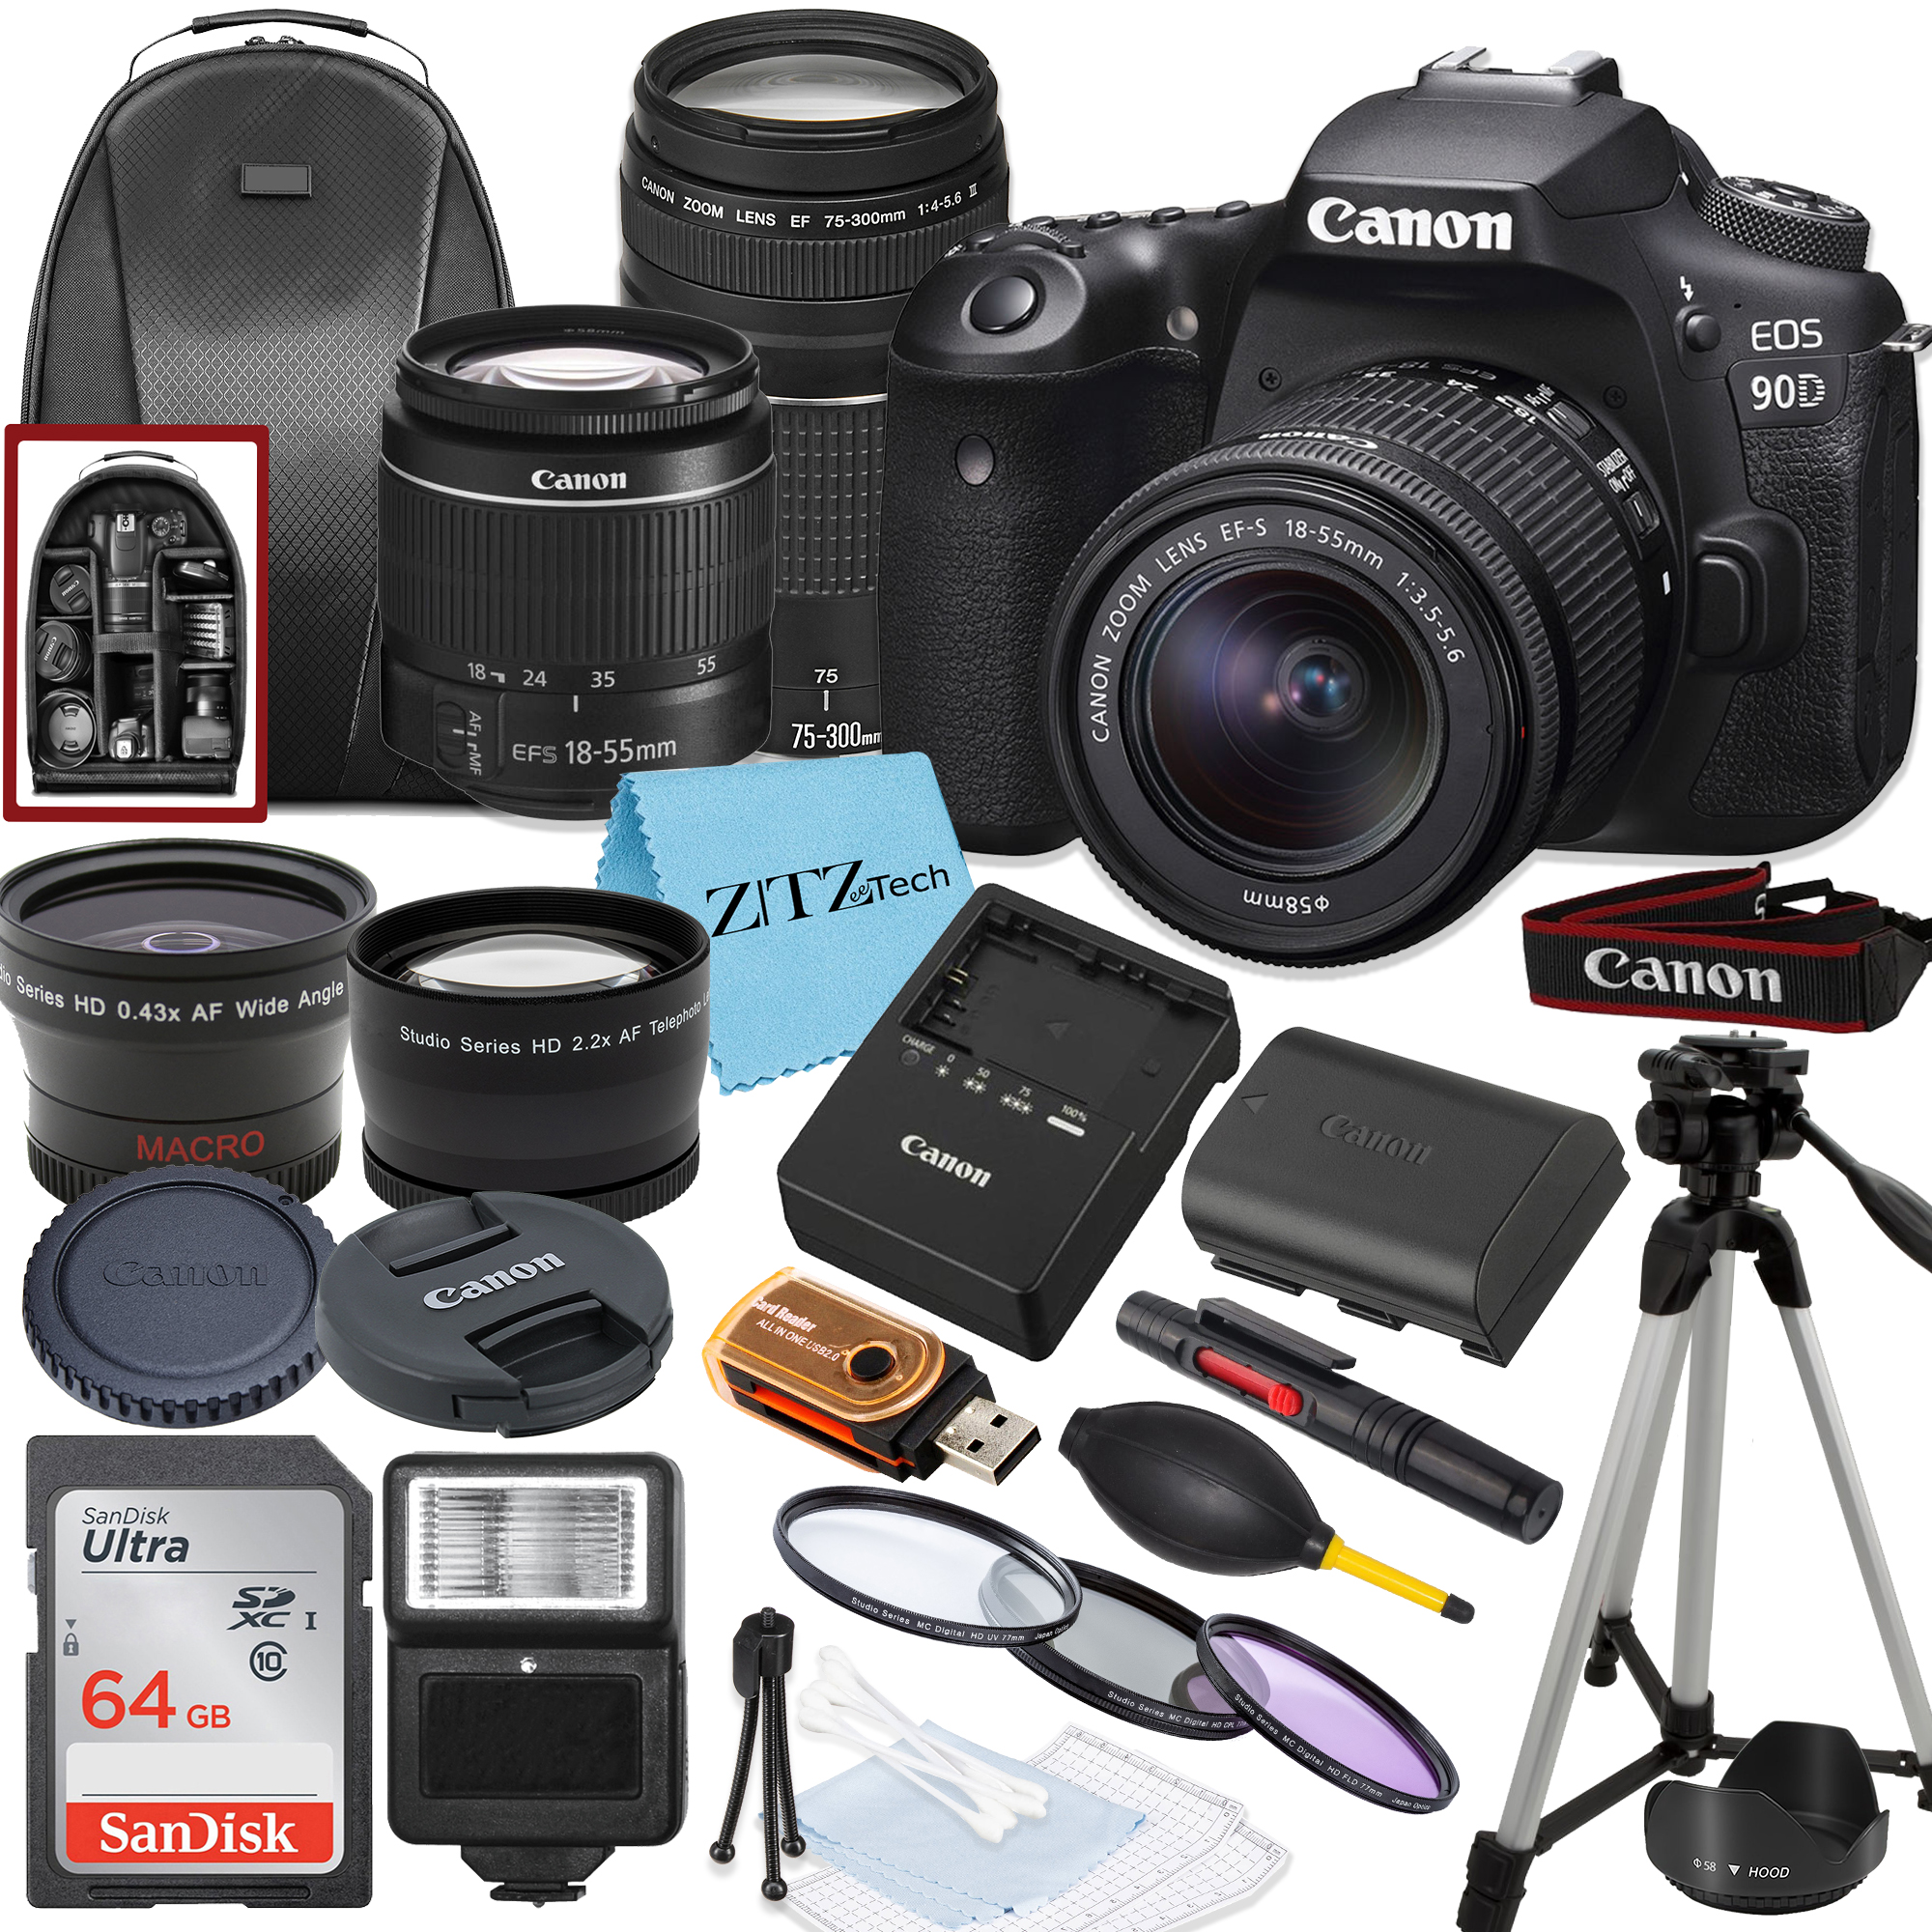 Canon EOS 90D DSLR Camera with 18-55mm, 75-300mm Lens, SanDisk 64GB Card, Backpack, Flash, Tripod and ZeeTech Accessory Bundle